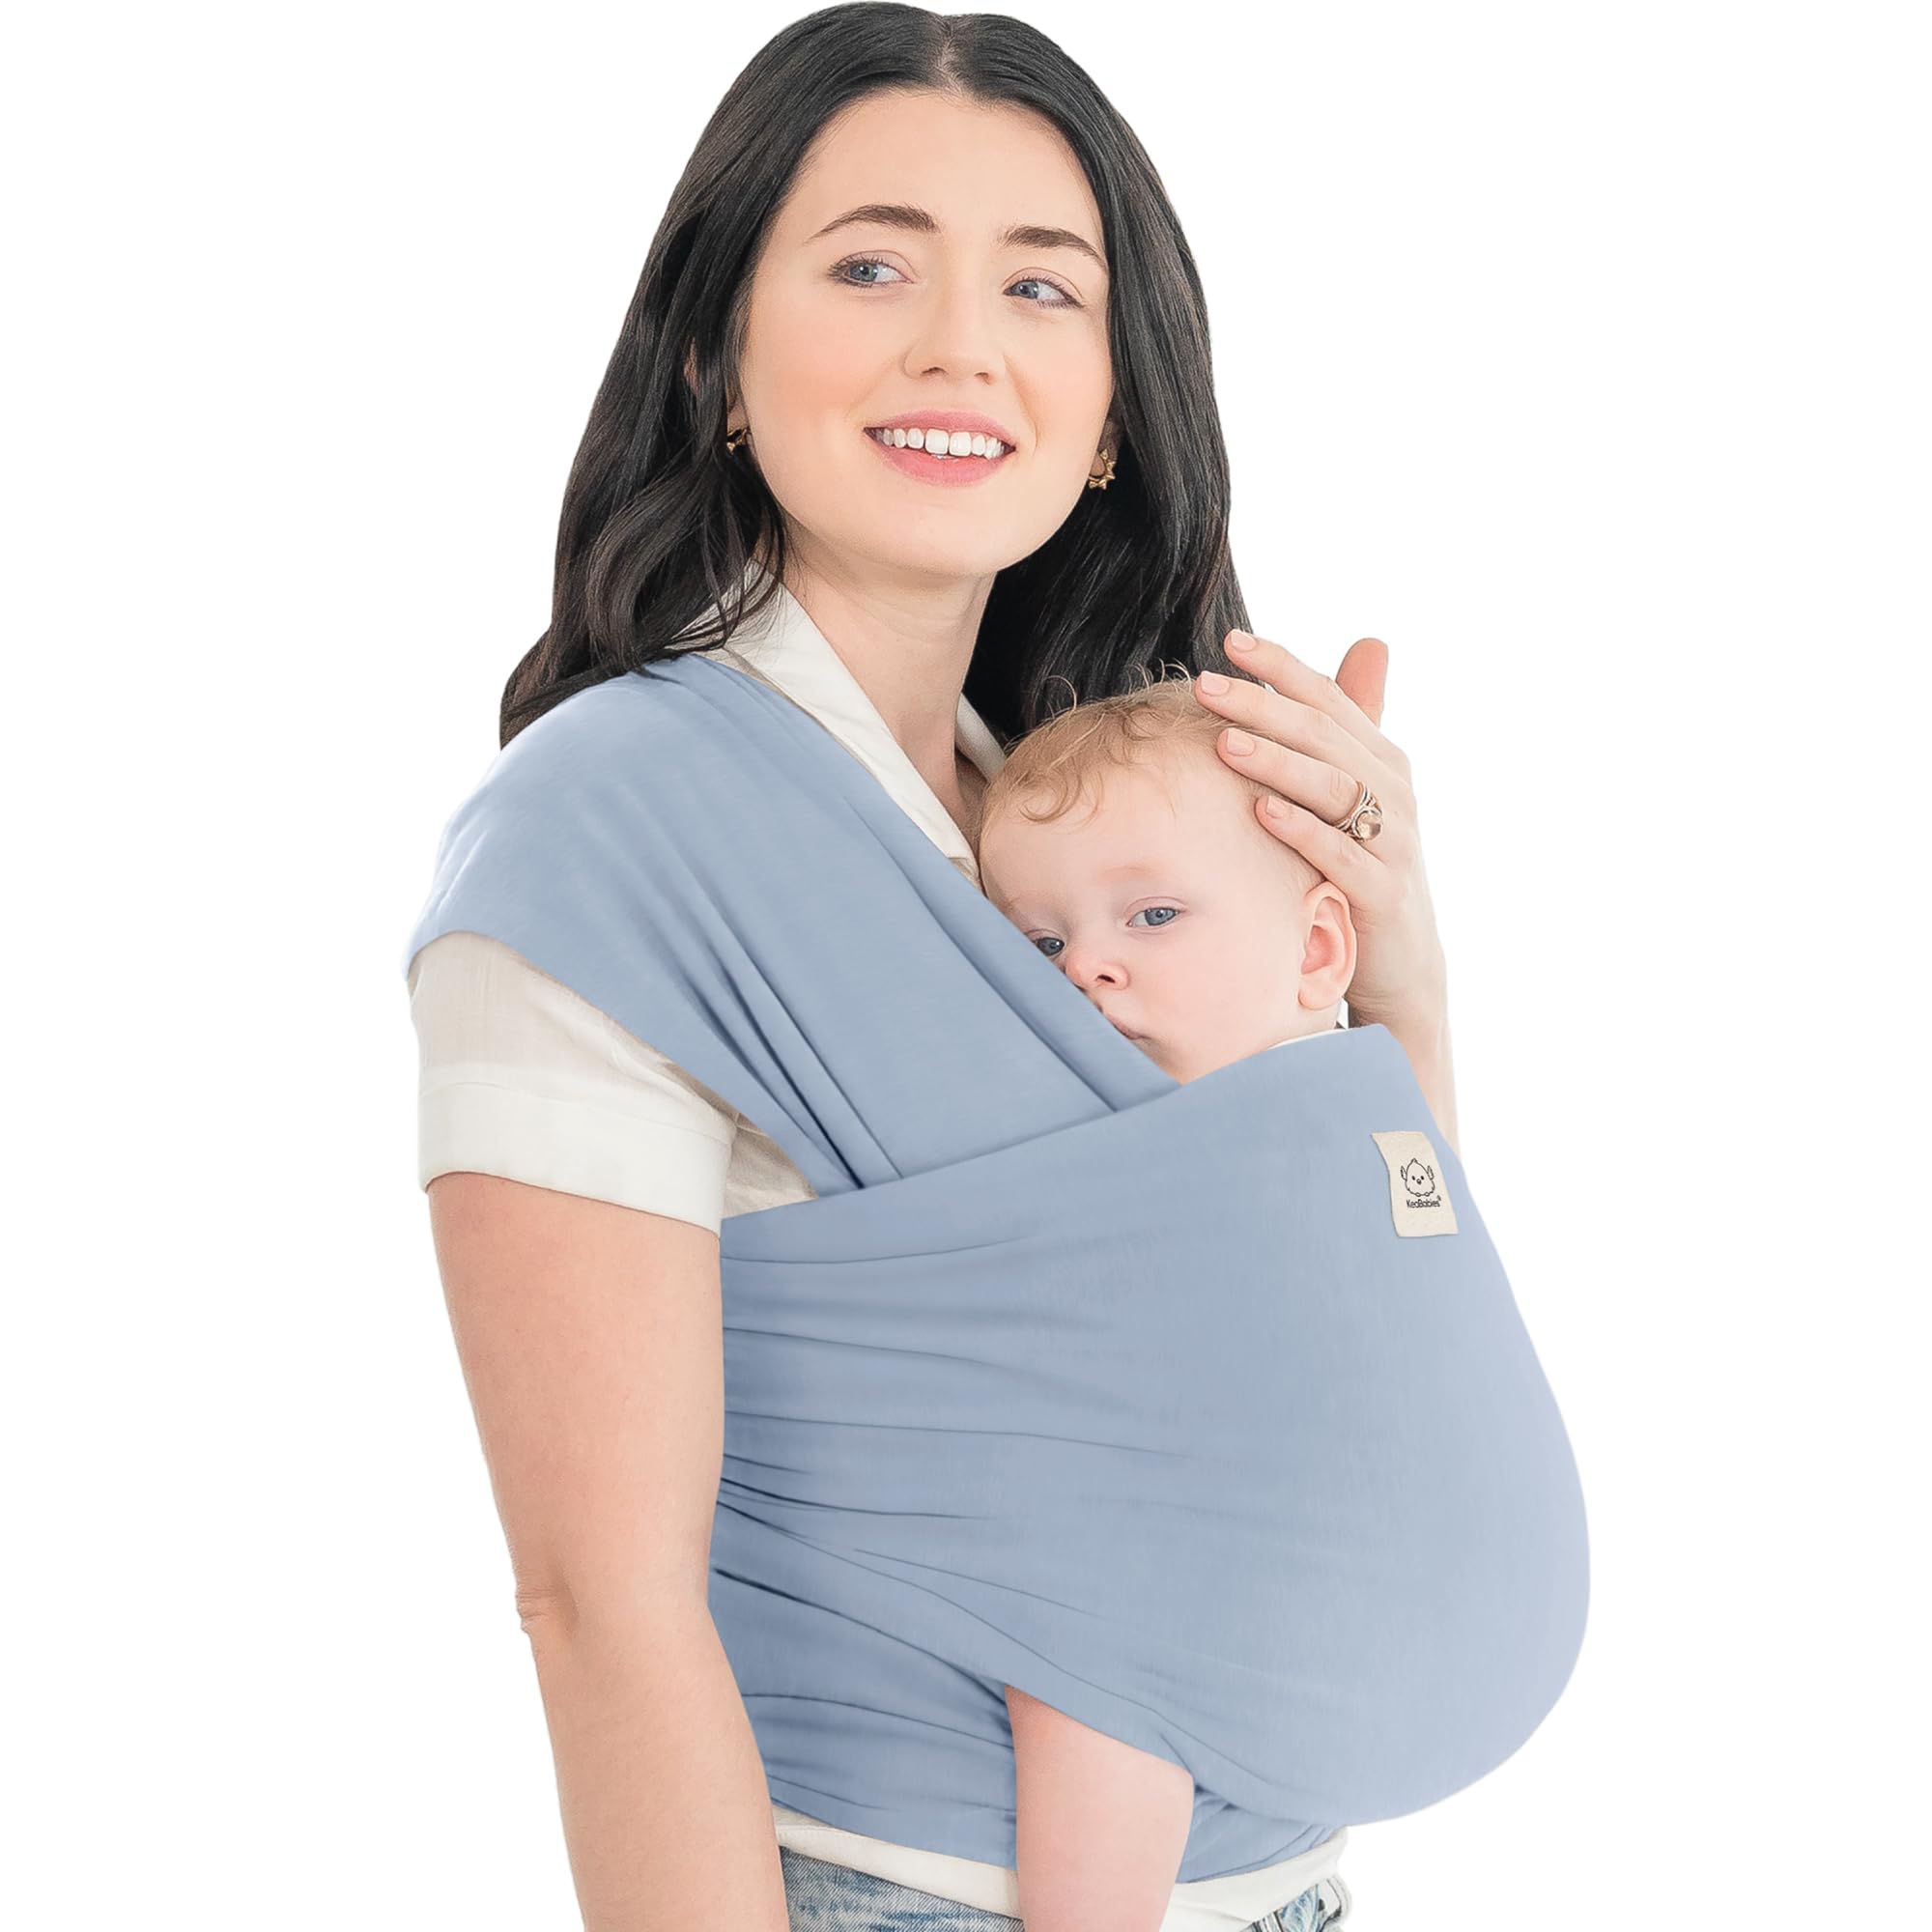 KeaBabies Baby Wrap Carrier - All in 1 Original Breathable Baby Sling, Lightweight,Hands Free Baby Carrier Sling, Baby Carrier W